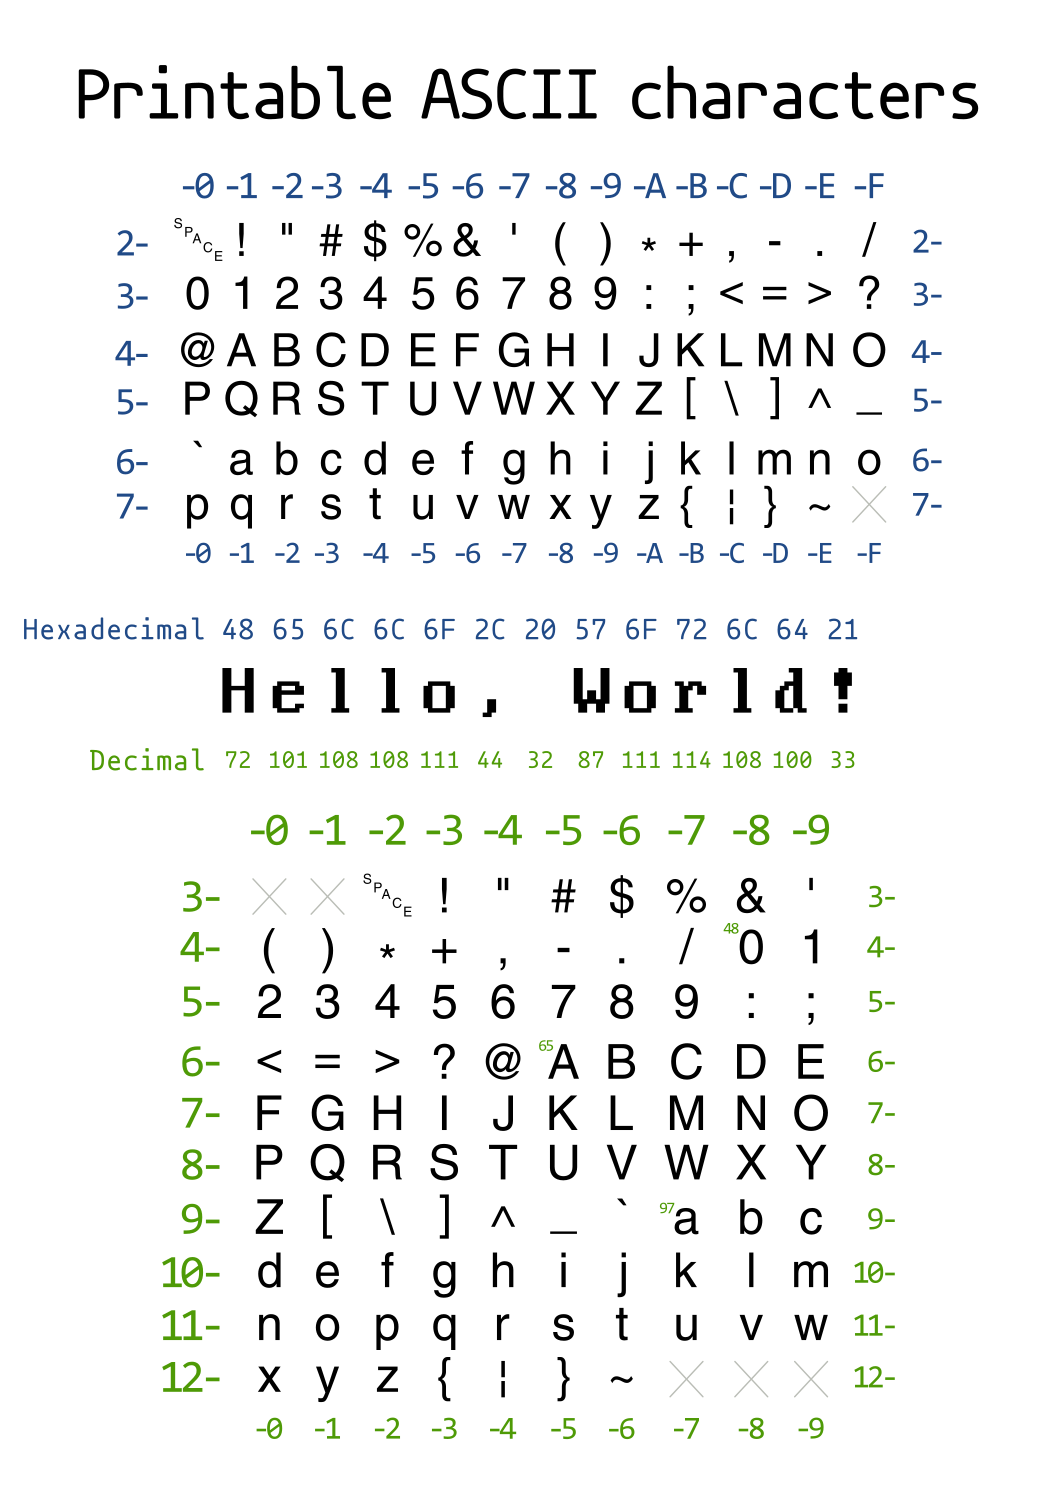 ASCIIprintable.png